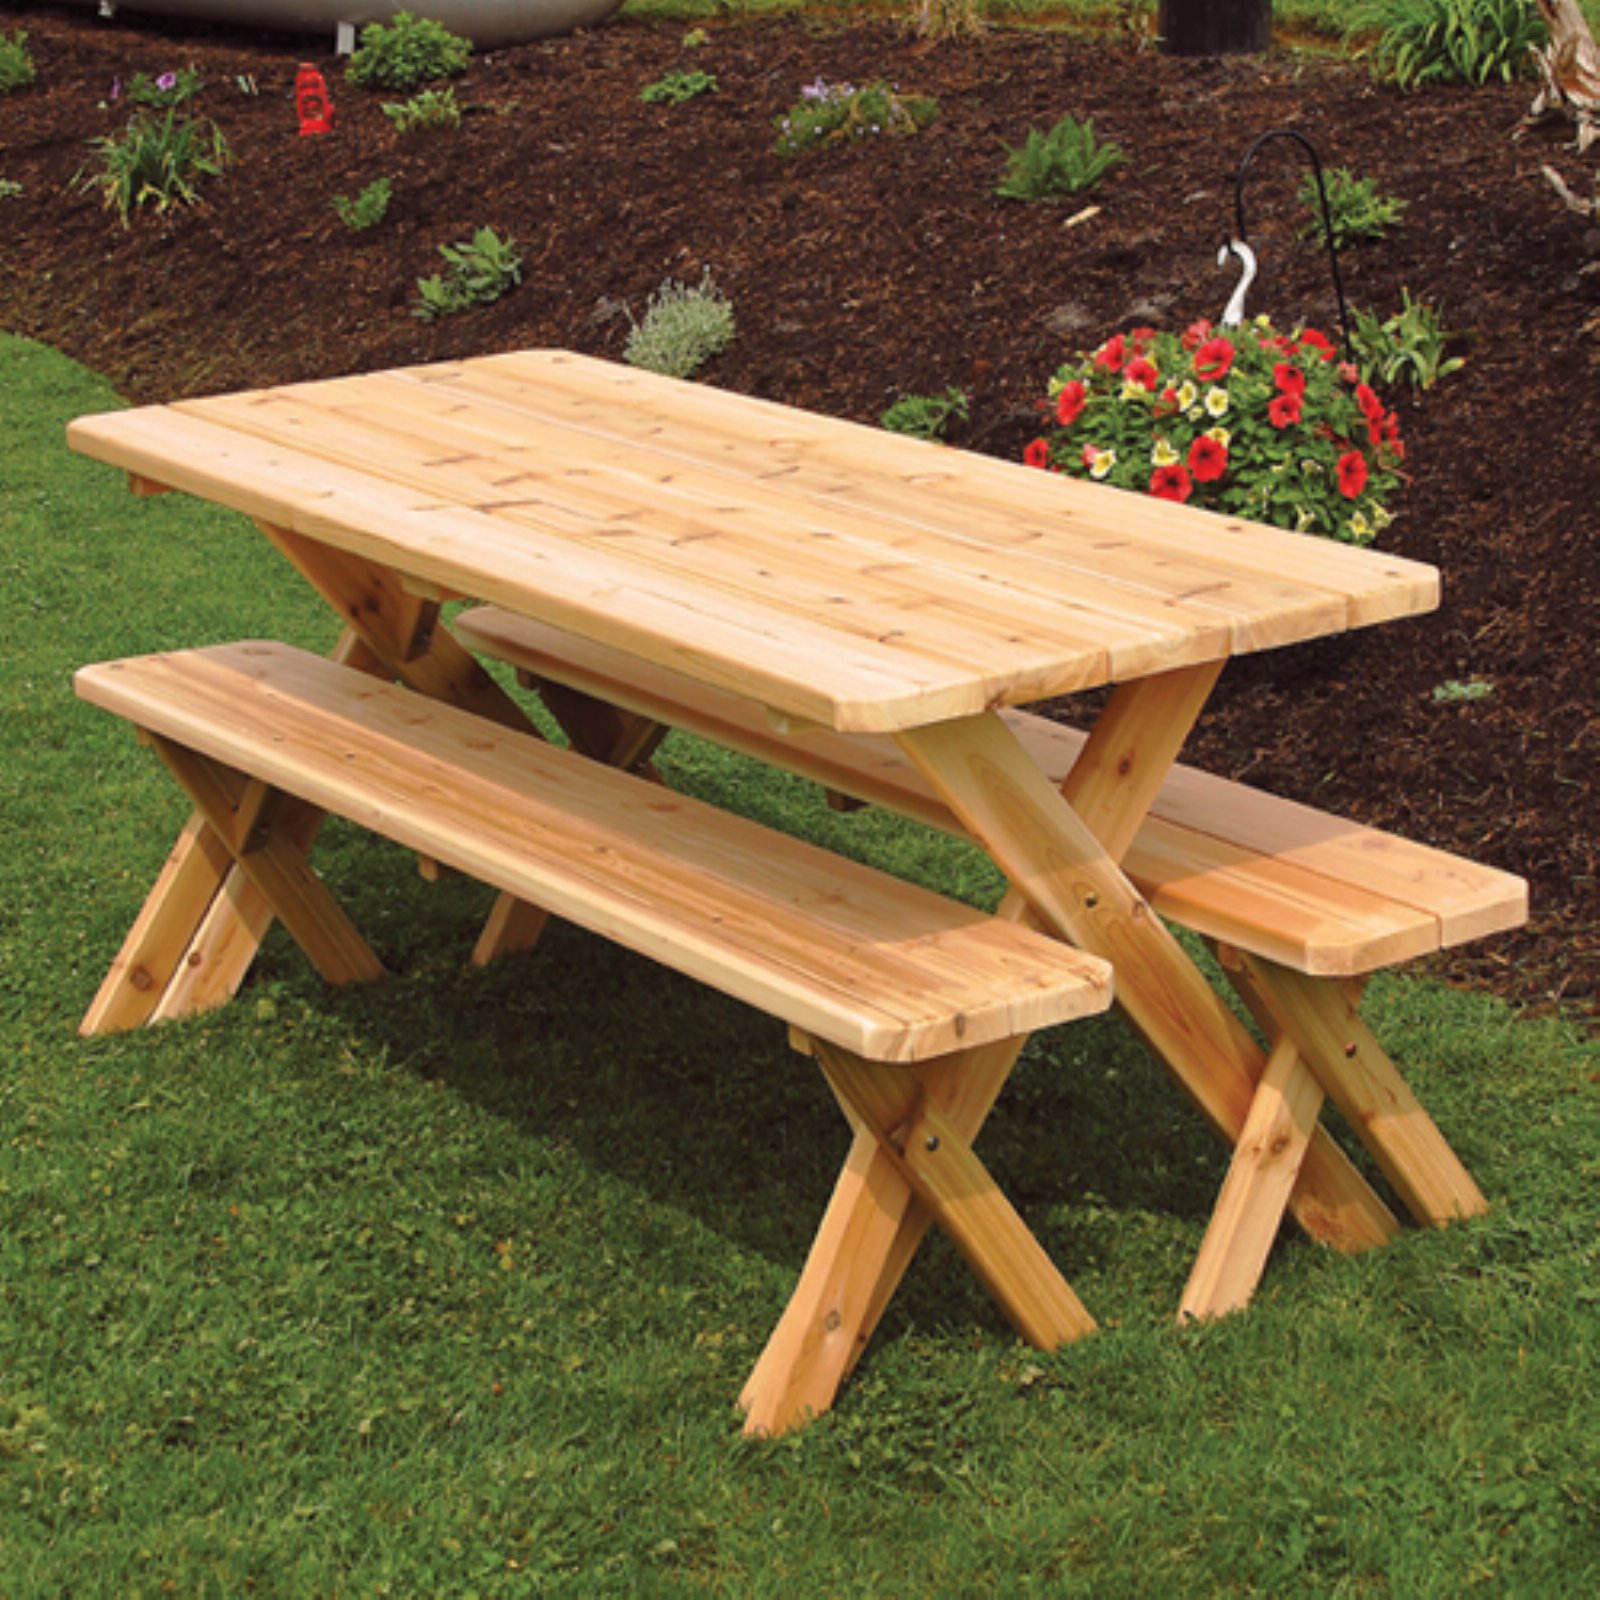 A &amp; L Furniture Western Red Cedar Crossleg Picnic Table with 2 Benches - image 2 of 2